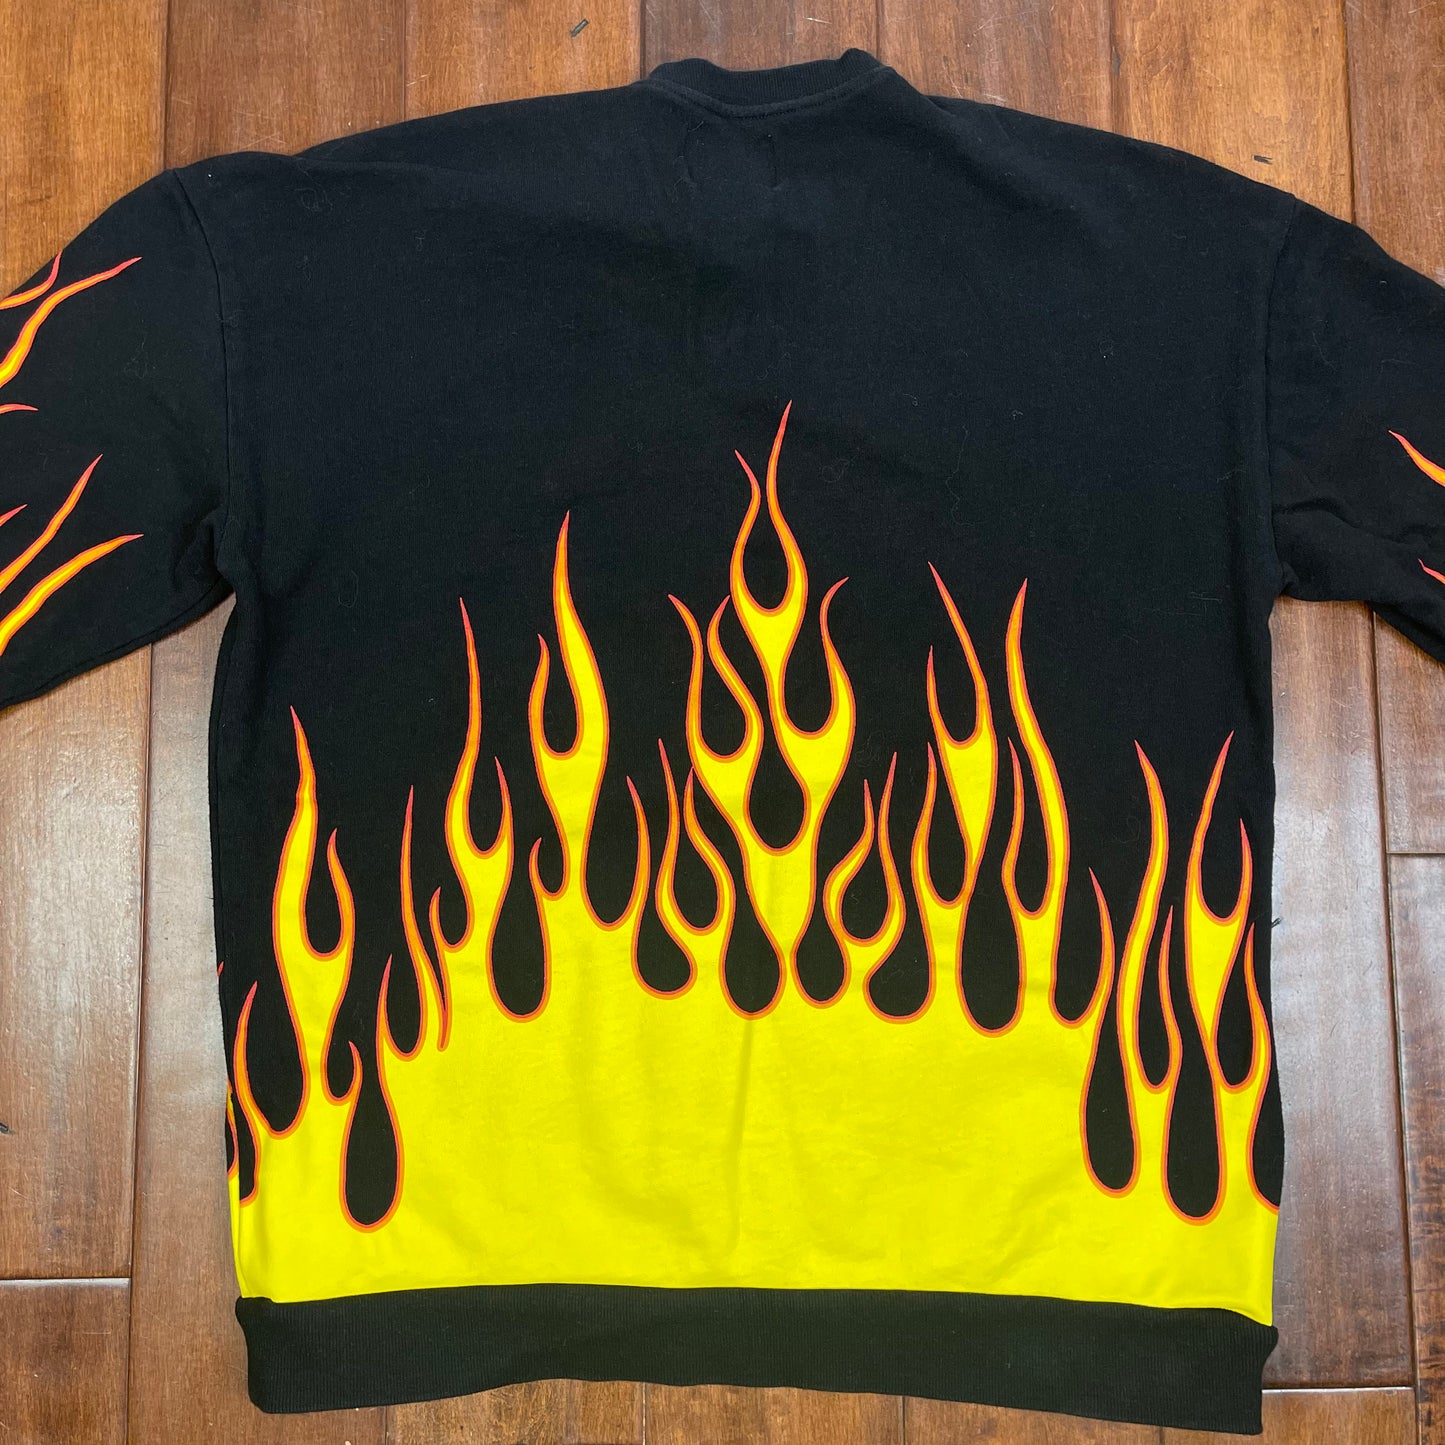 THRIFTED FLAMES CREWNECK